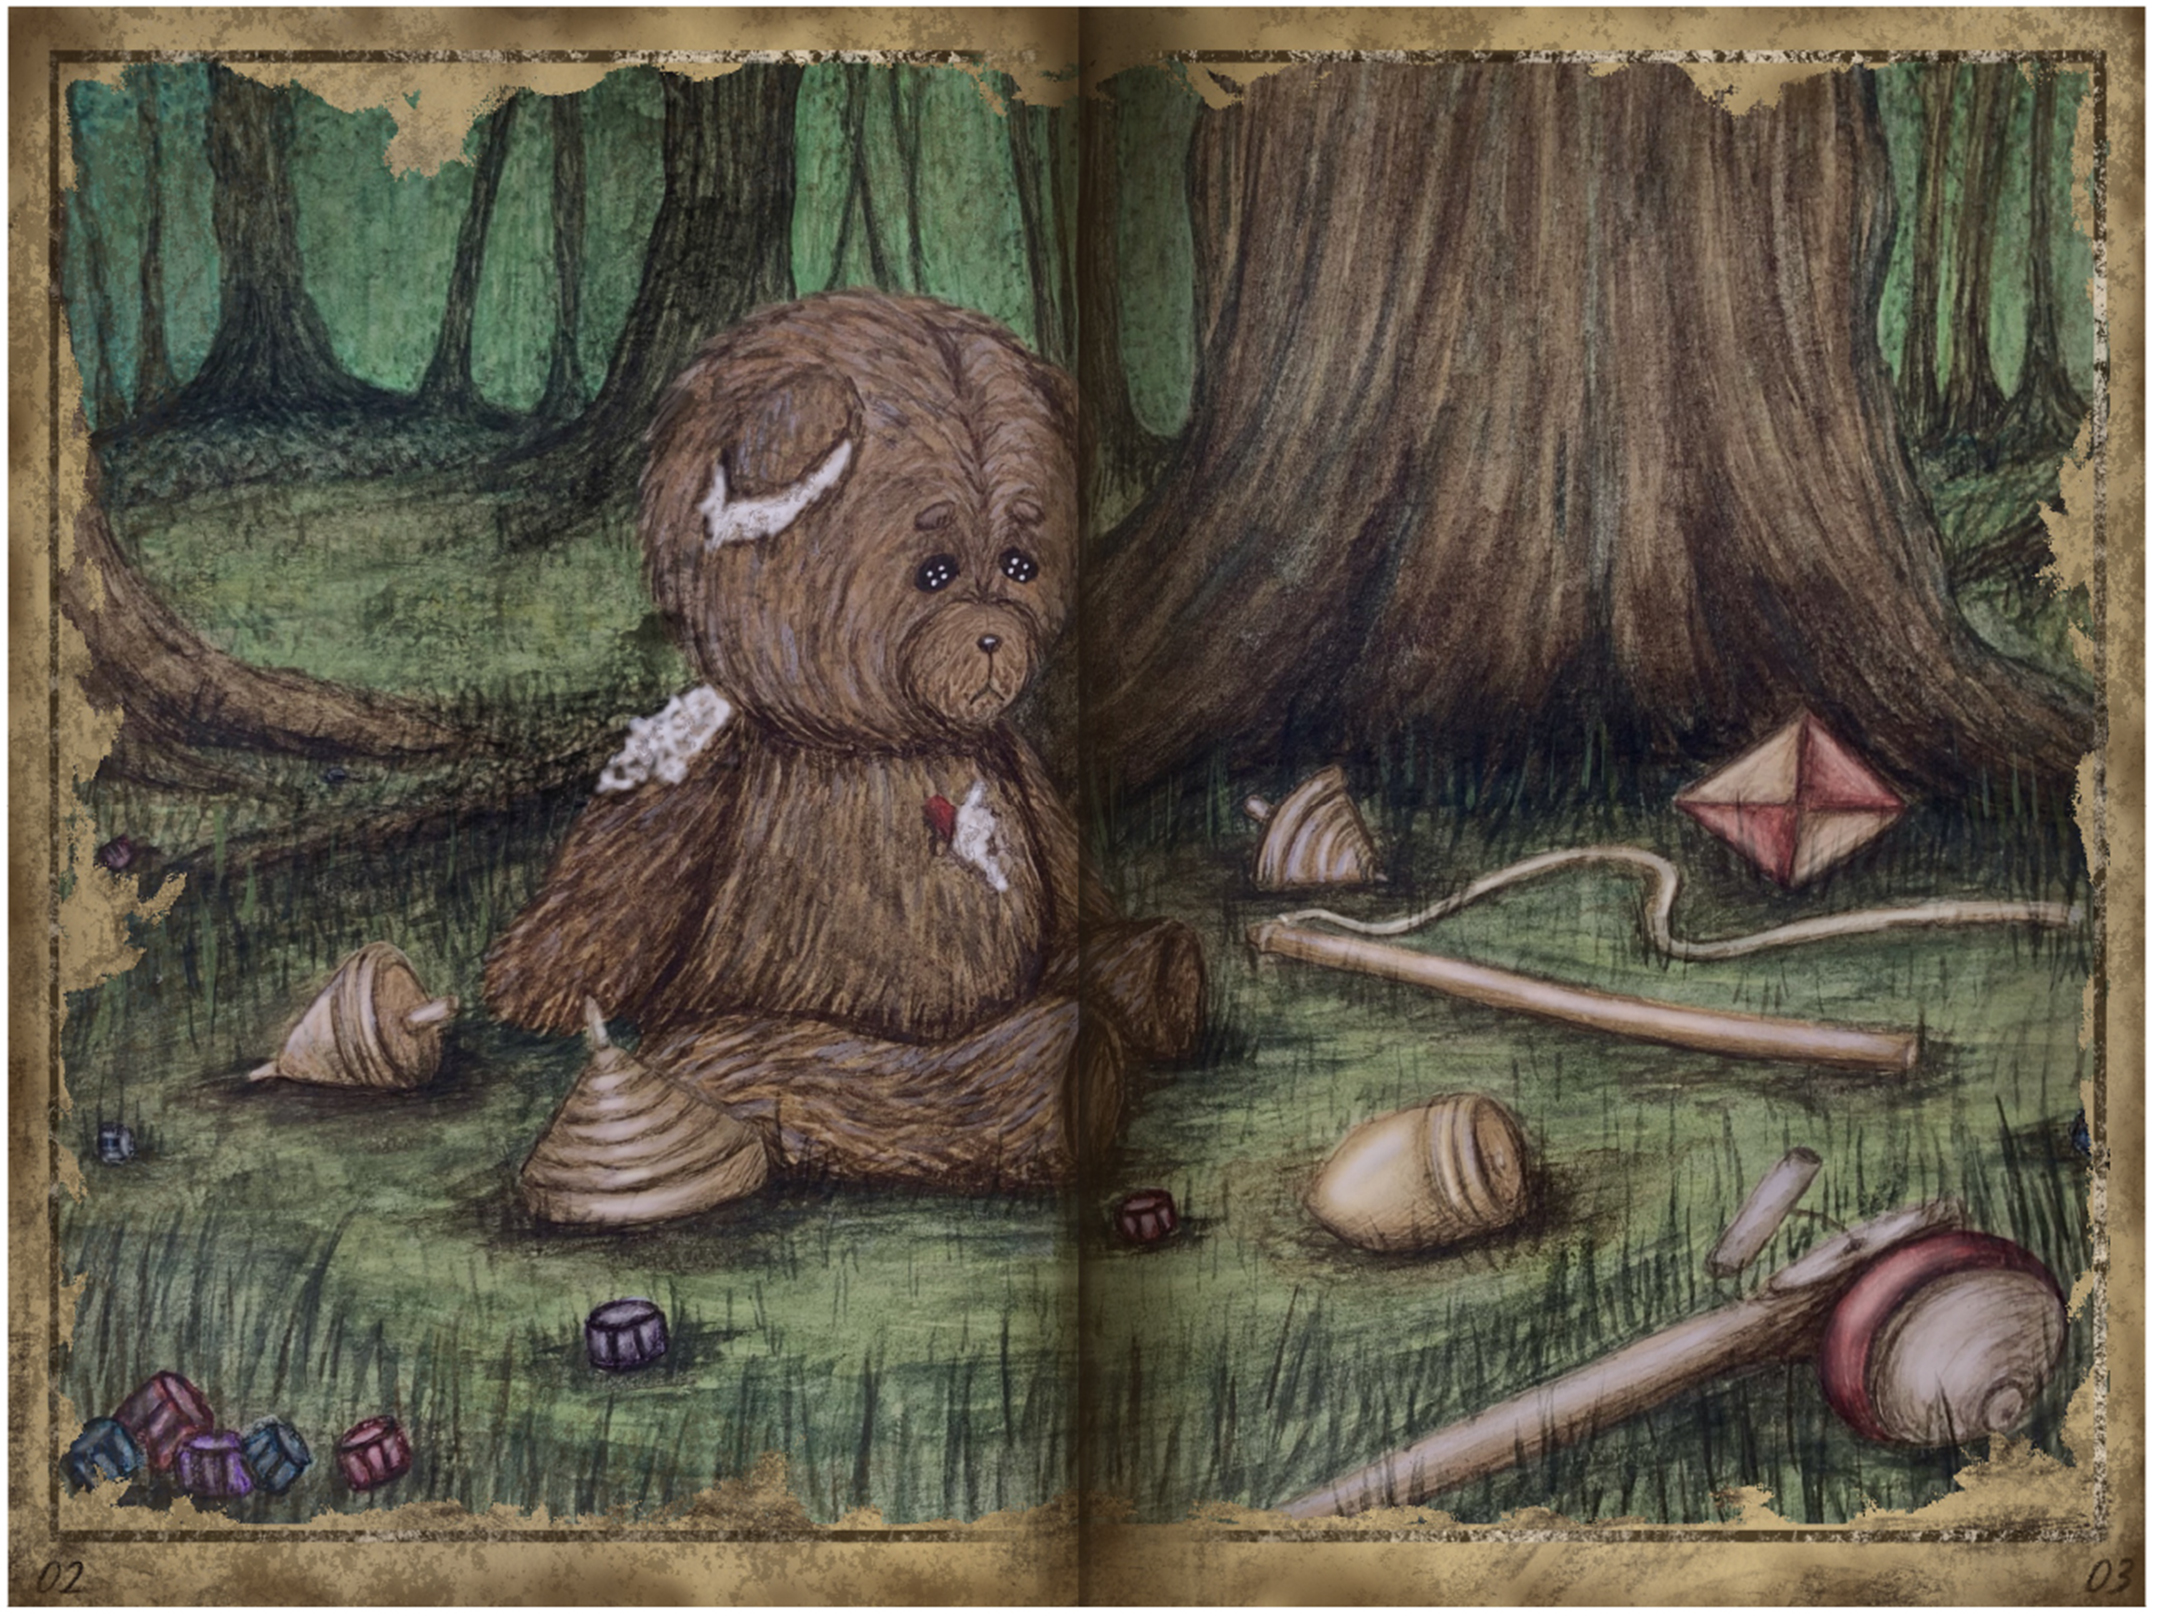 illustration of a discarded and fraying stuffed brown bear in a dark forest, with downcast eyes looking at the ground strewn with other discarded toys